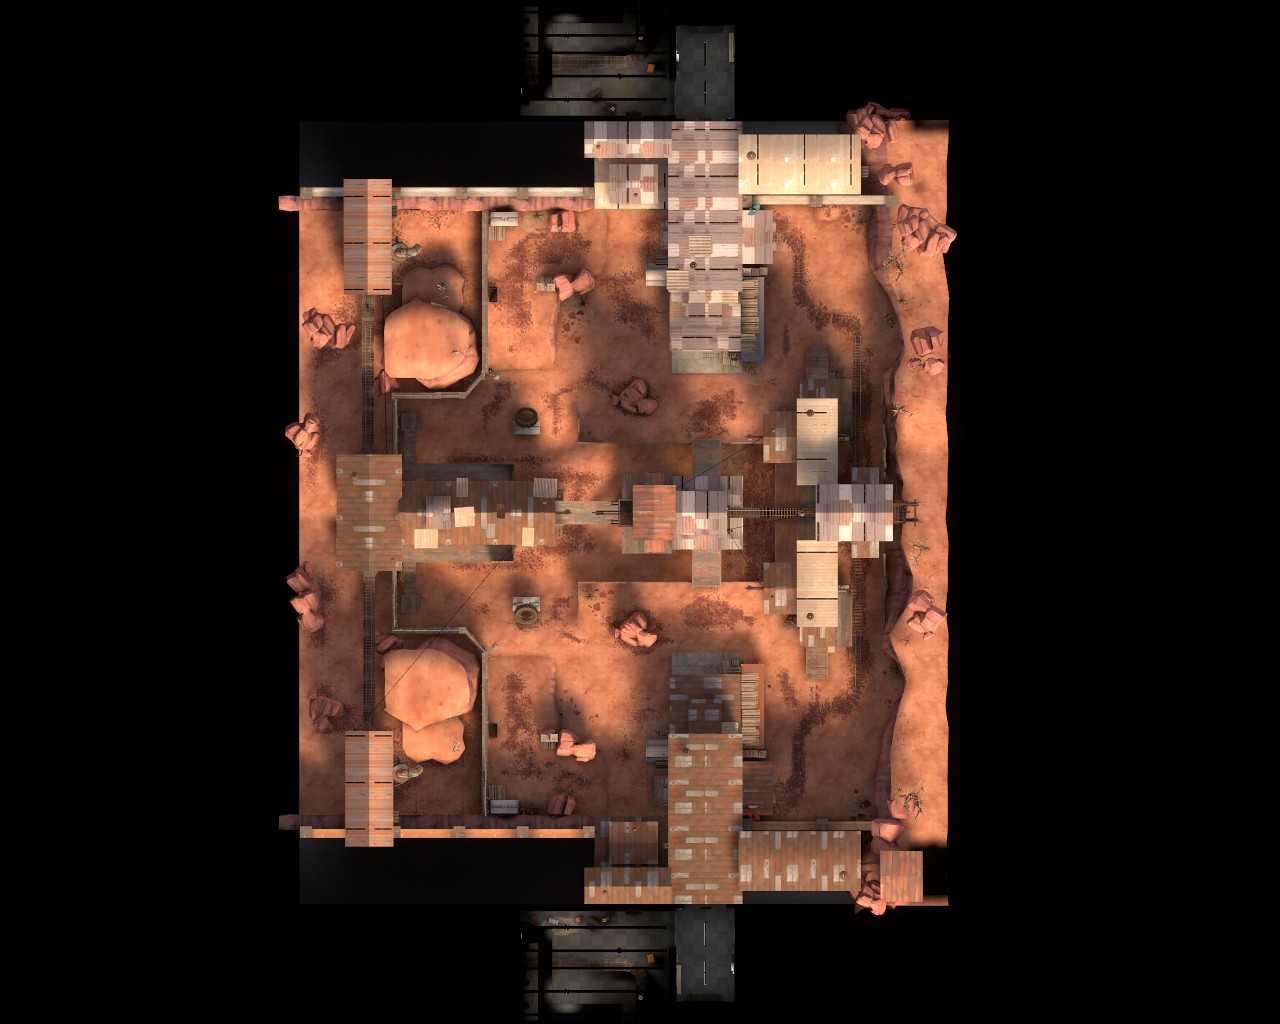 team_fortress_2_map_overview_arena_ravine.jpg